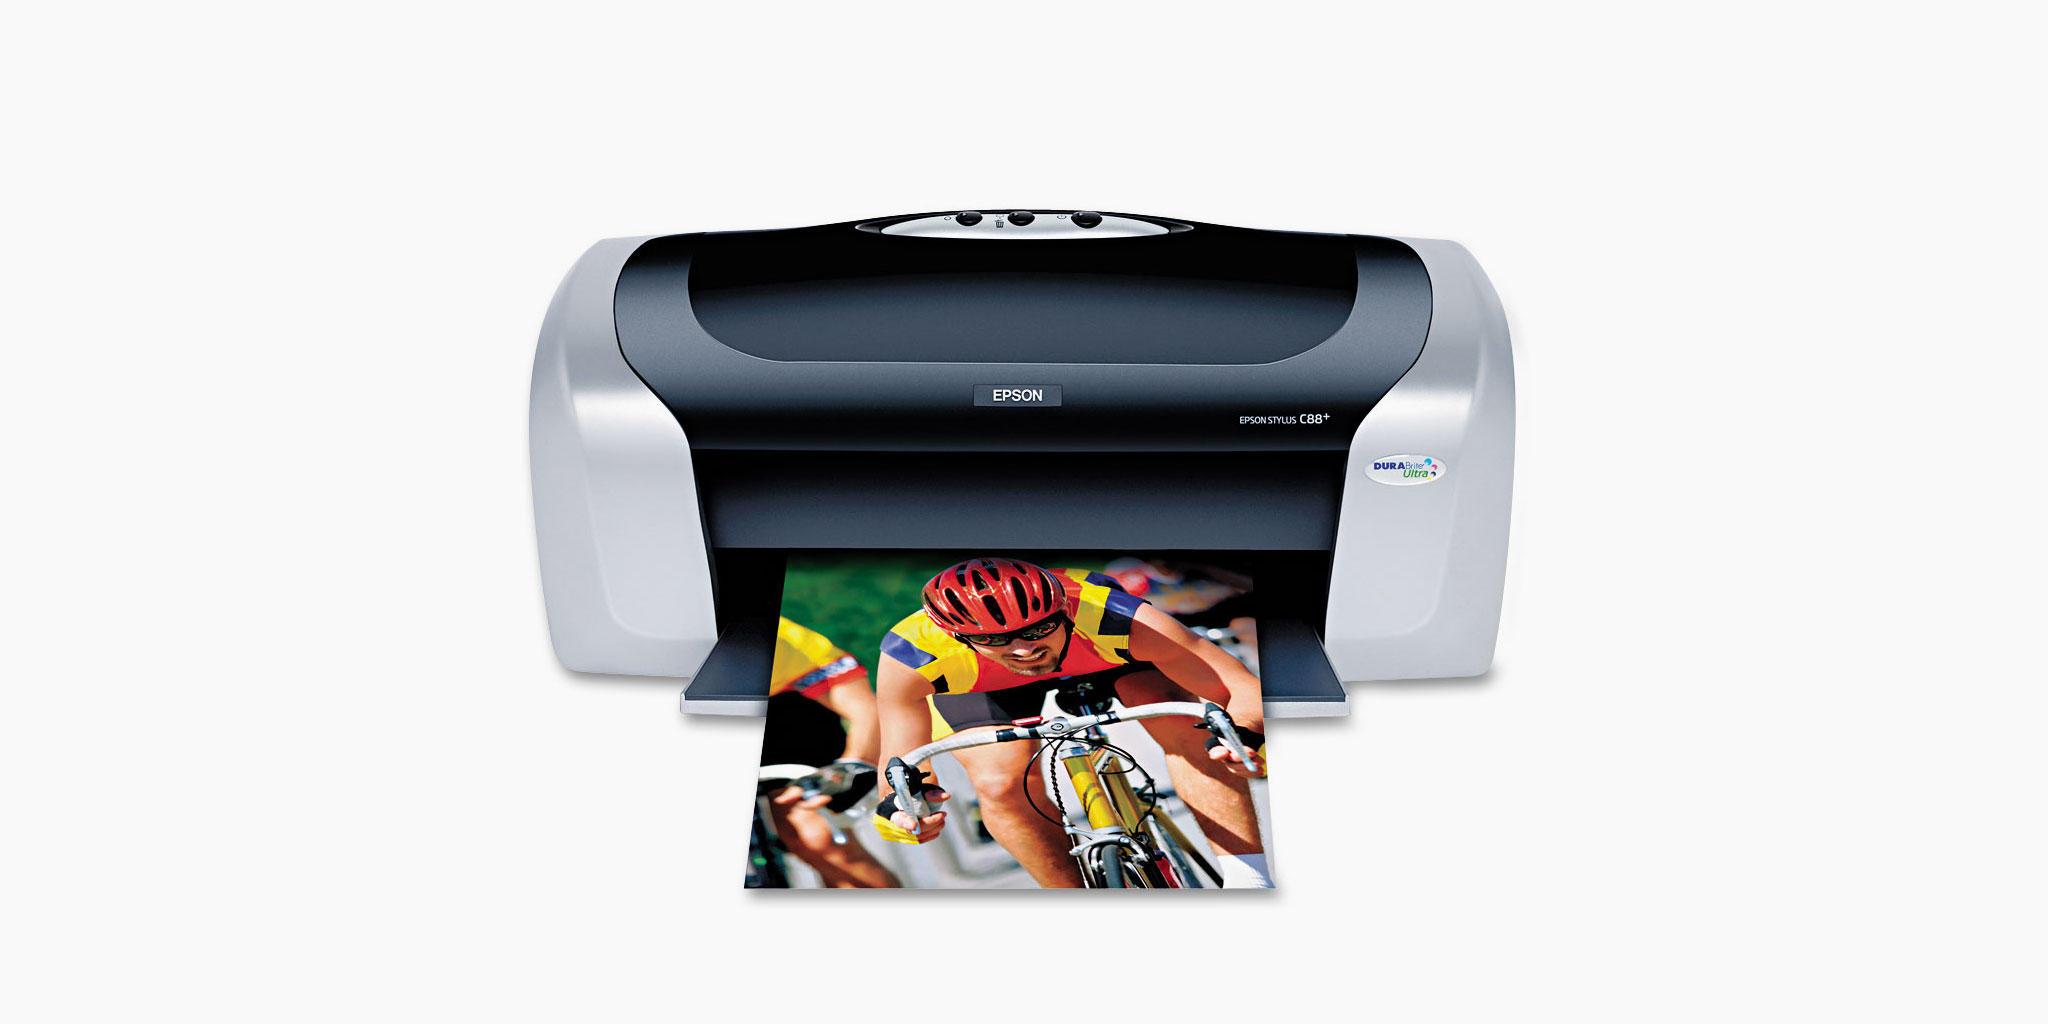 Best Printers for Heat Transfers: Paper and Other Projects - 2022 Reviews